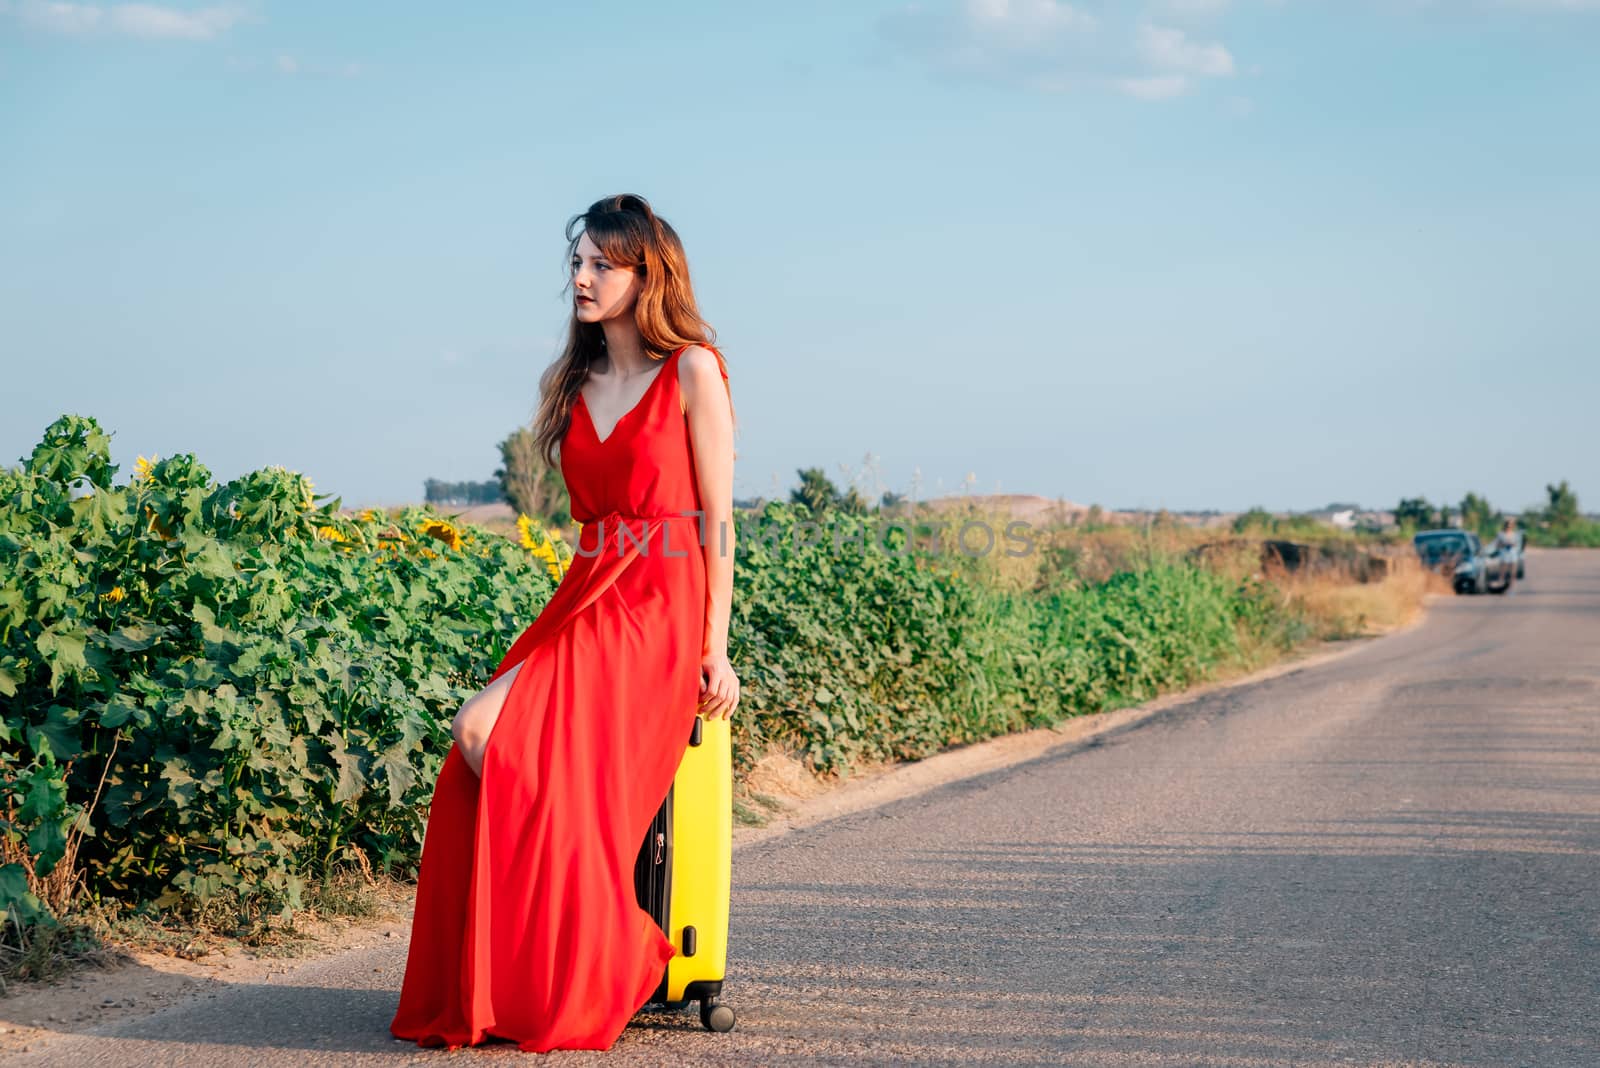 sad woman sitting in a suitcase on the road. by Fotoeventis